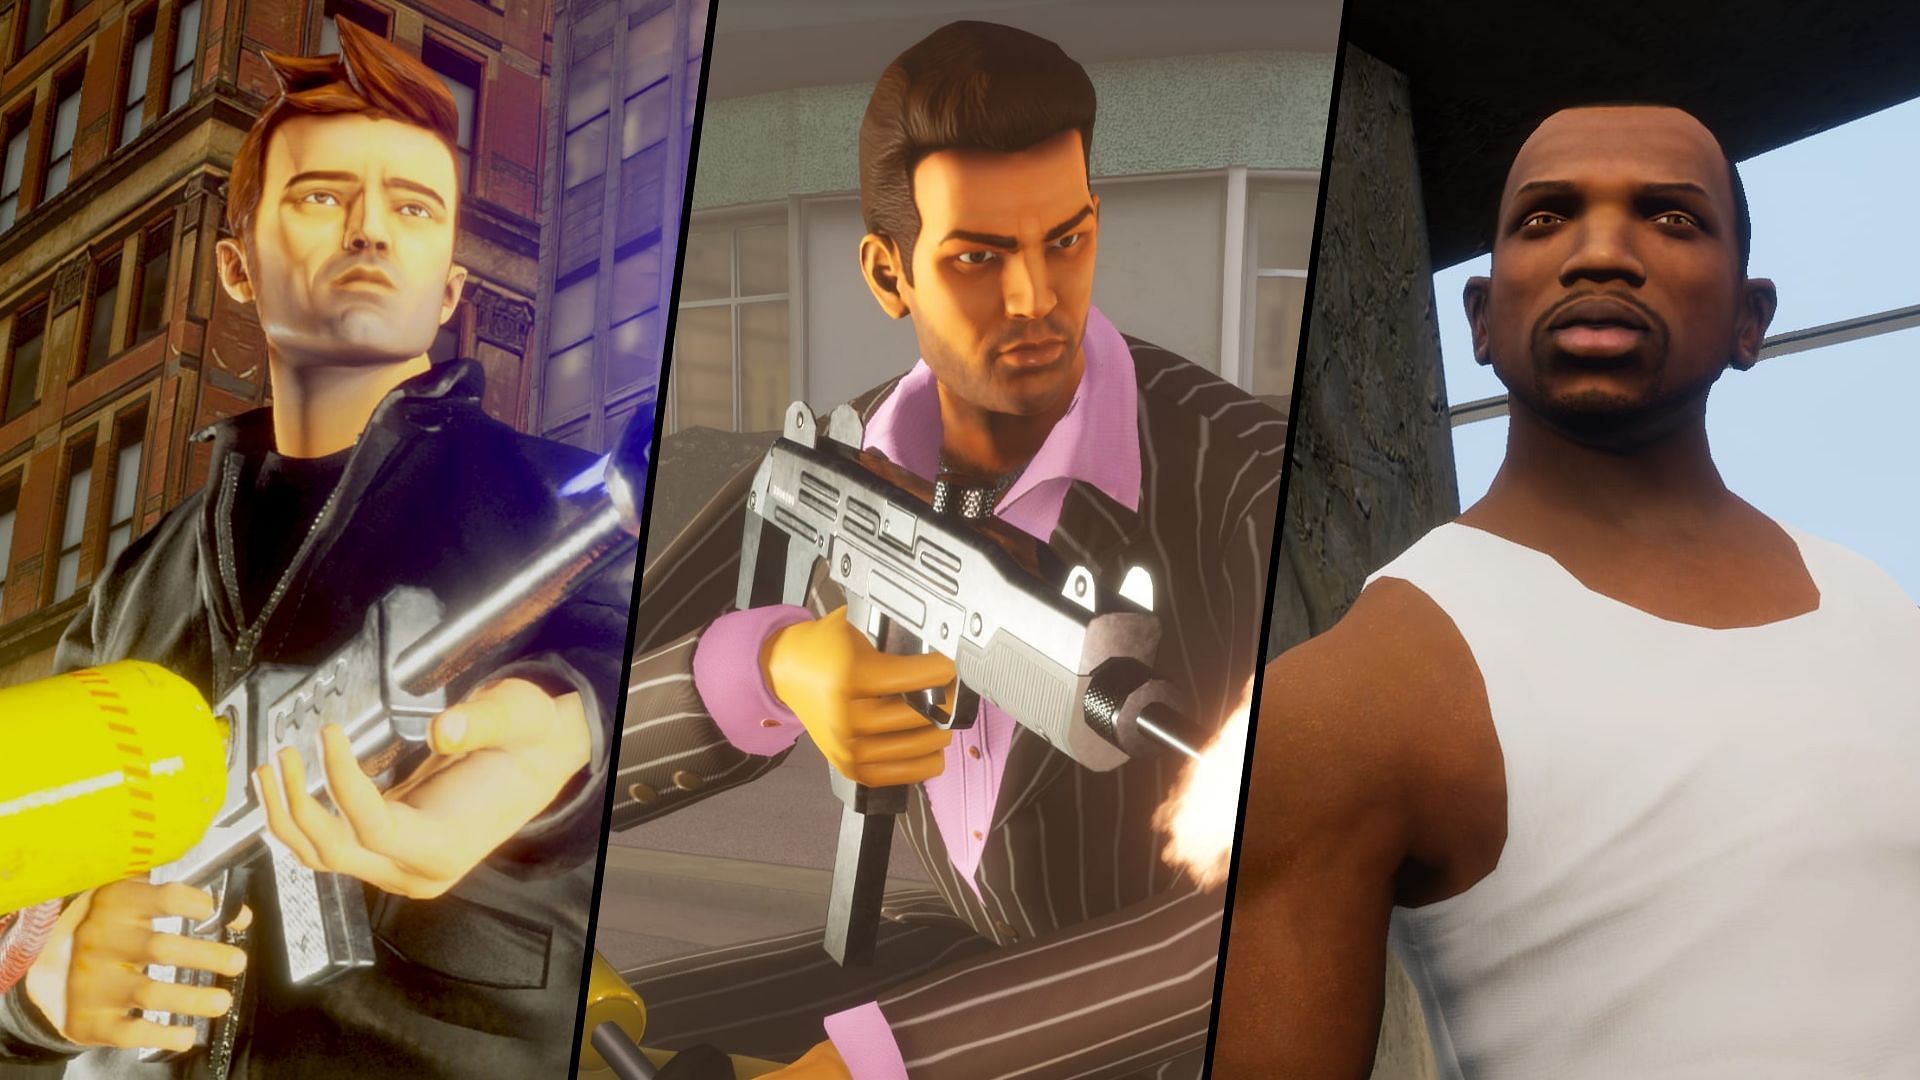 The GTA Trilogy could&#039;ve been better, but some modern gamers will prefer it over the originals (Image via Rockstar Games)